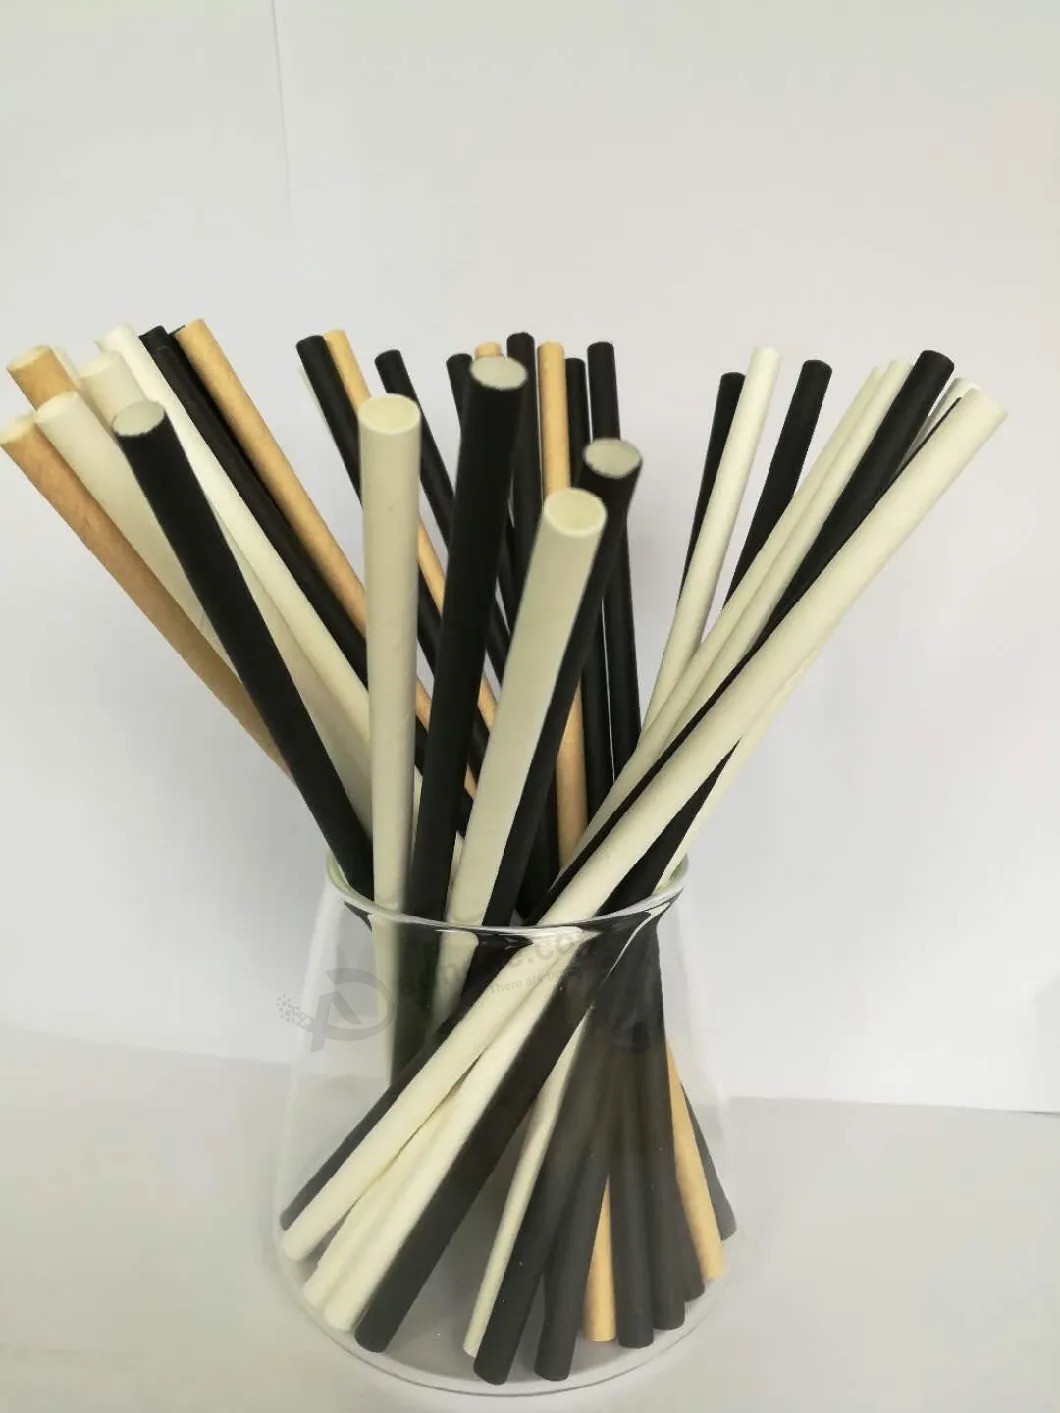 2020 Top seller Biodegradable drinking Straw paper Straw